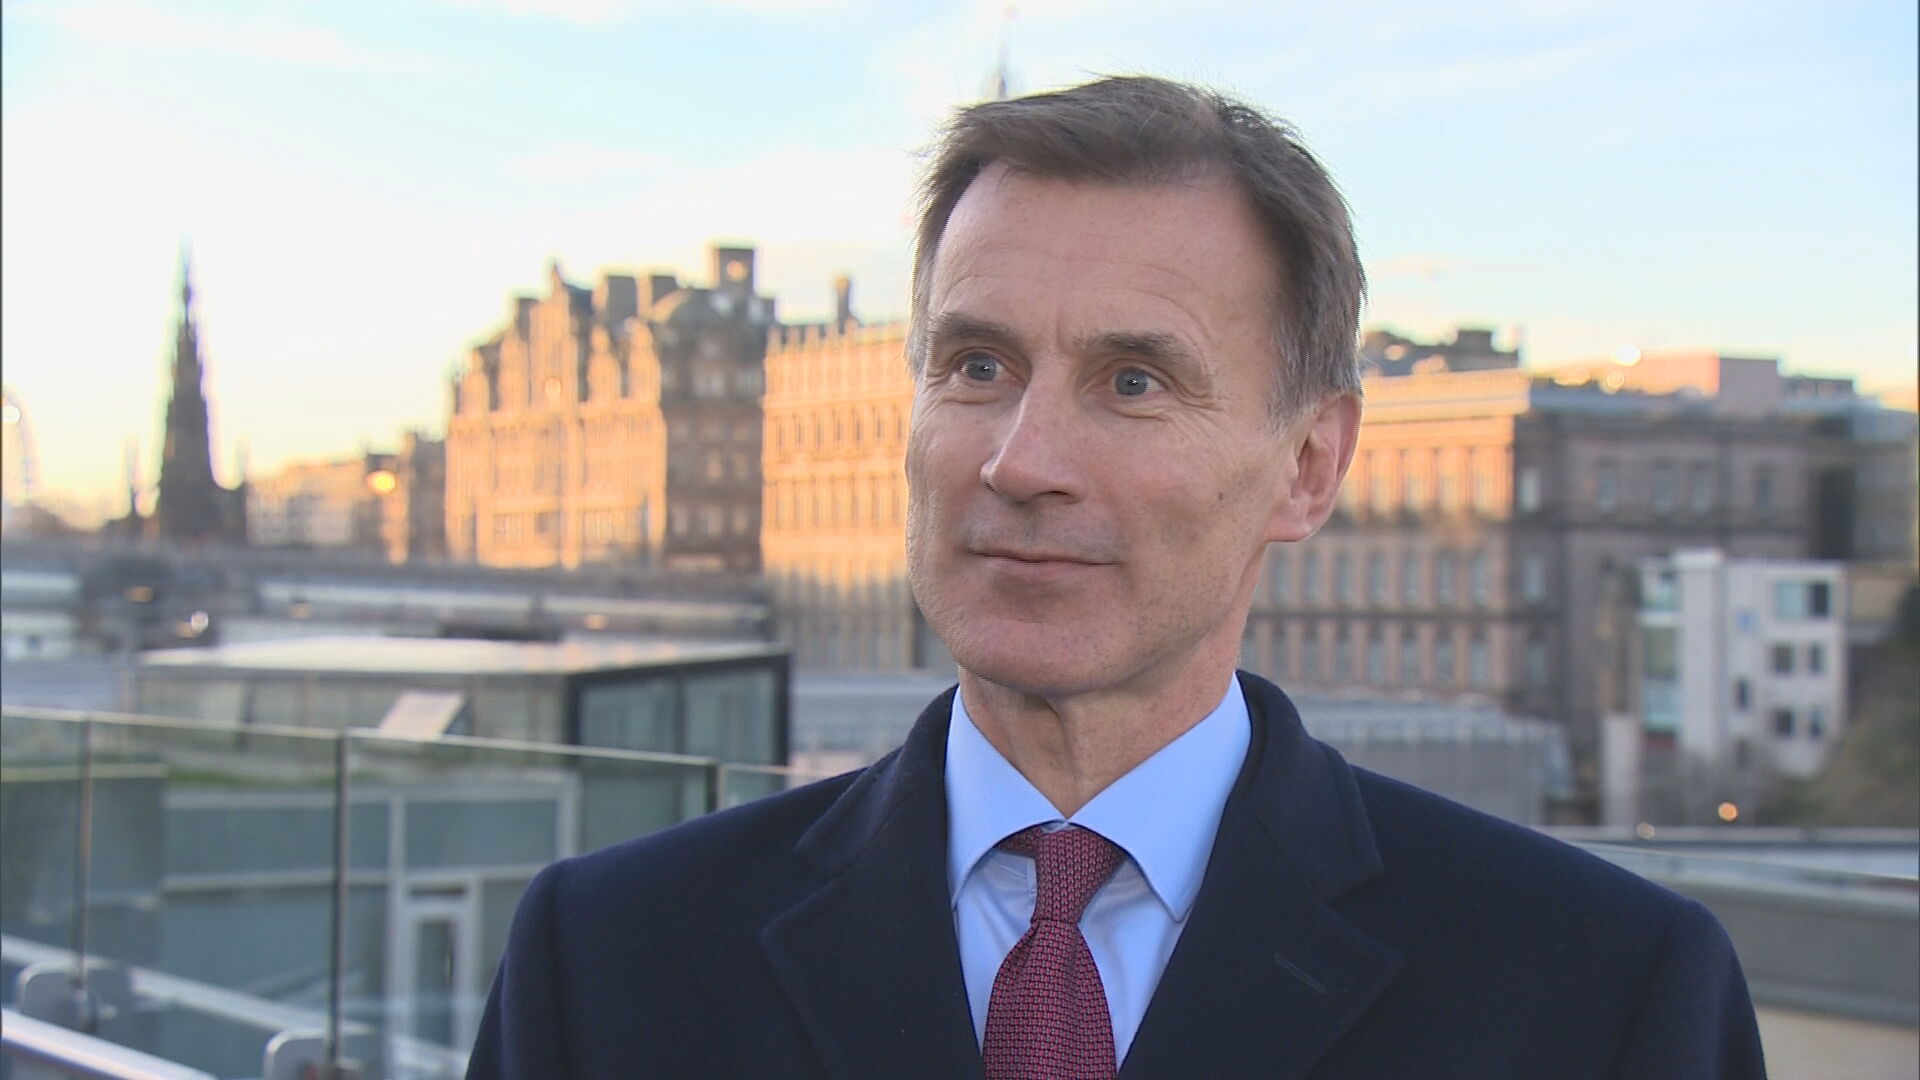 Chancellor Jeremy Hunt said his number one priority is tackling inflation.